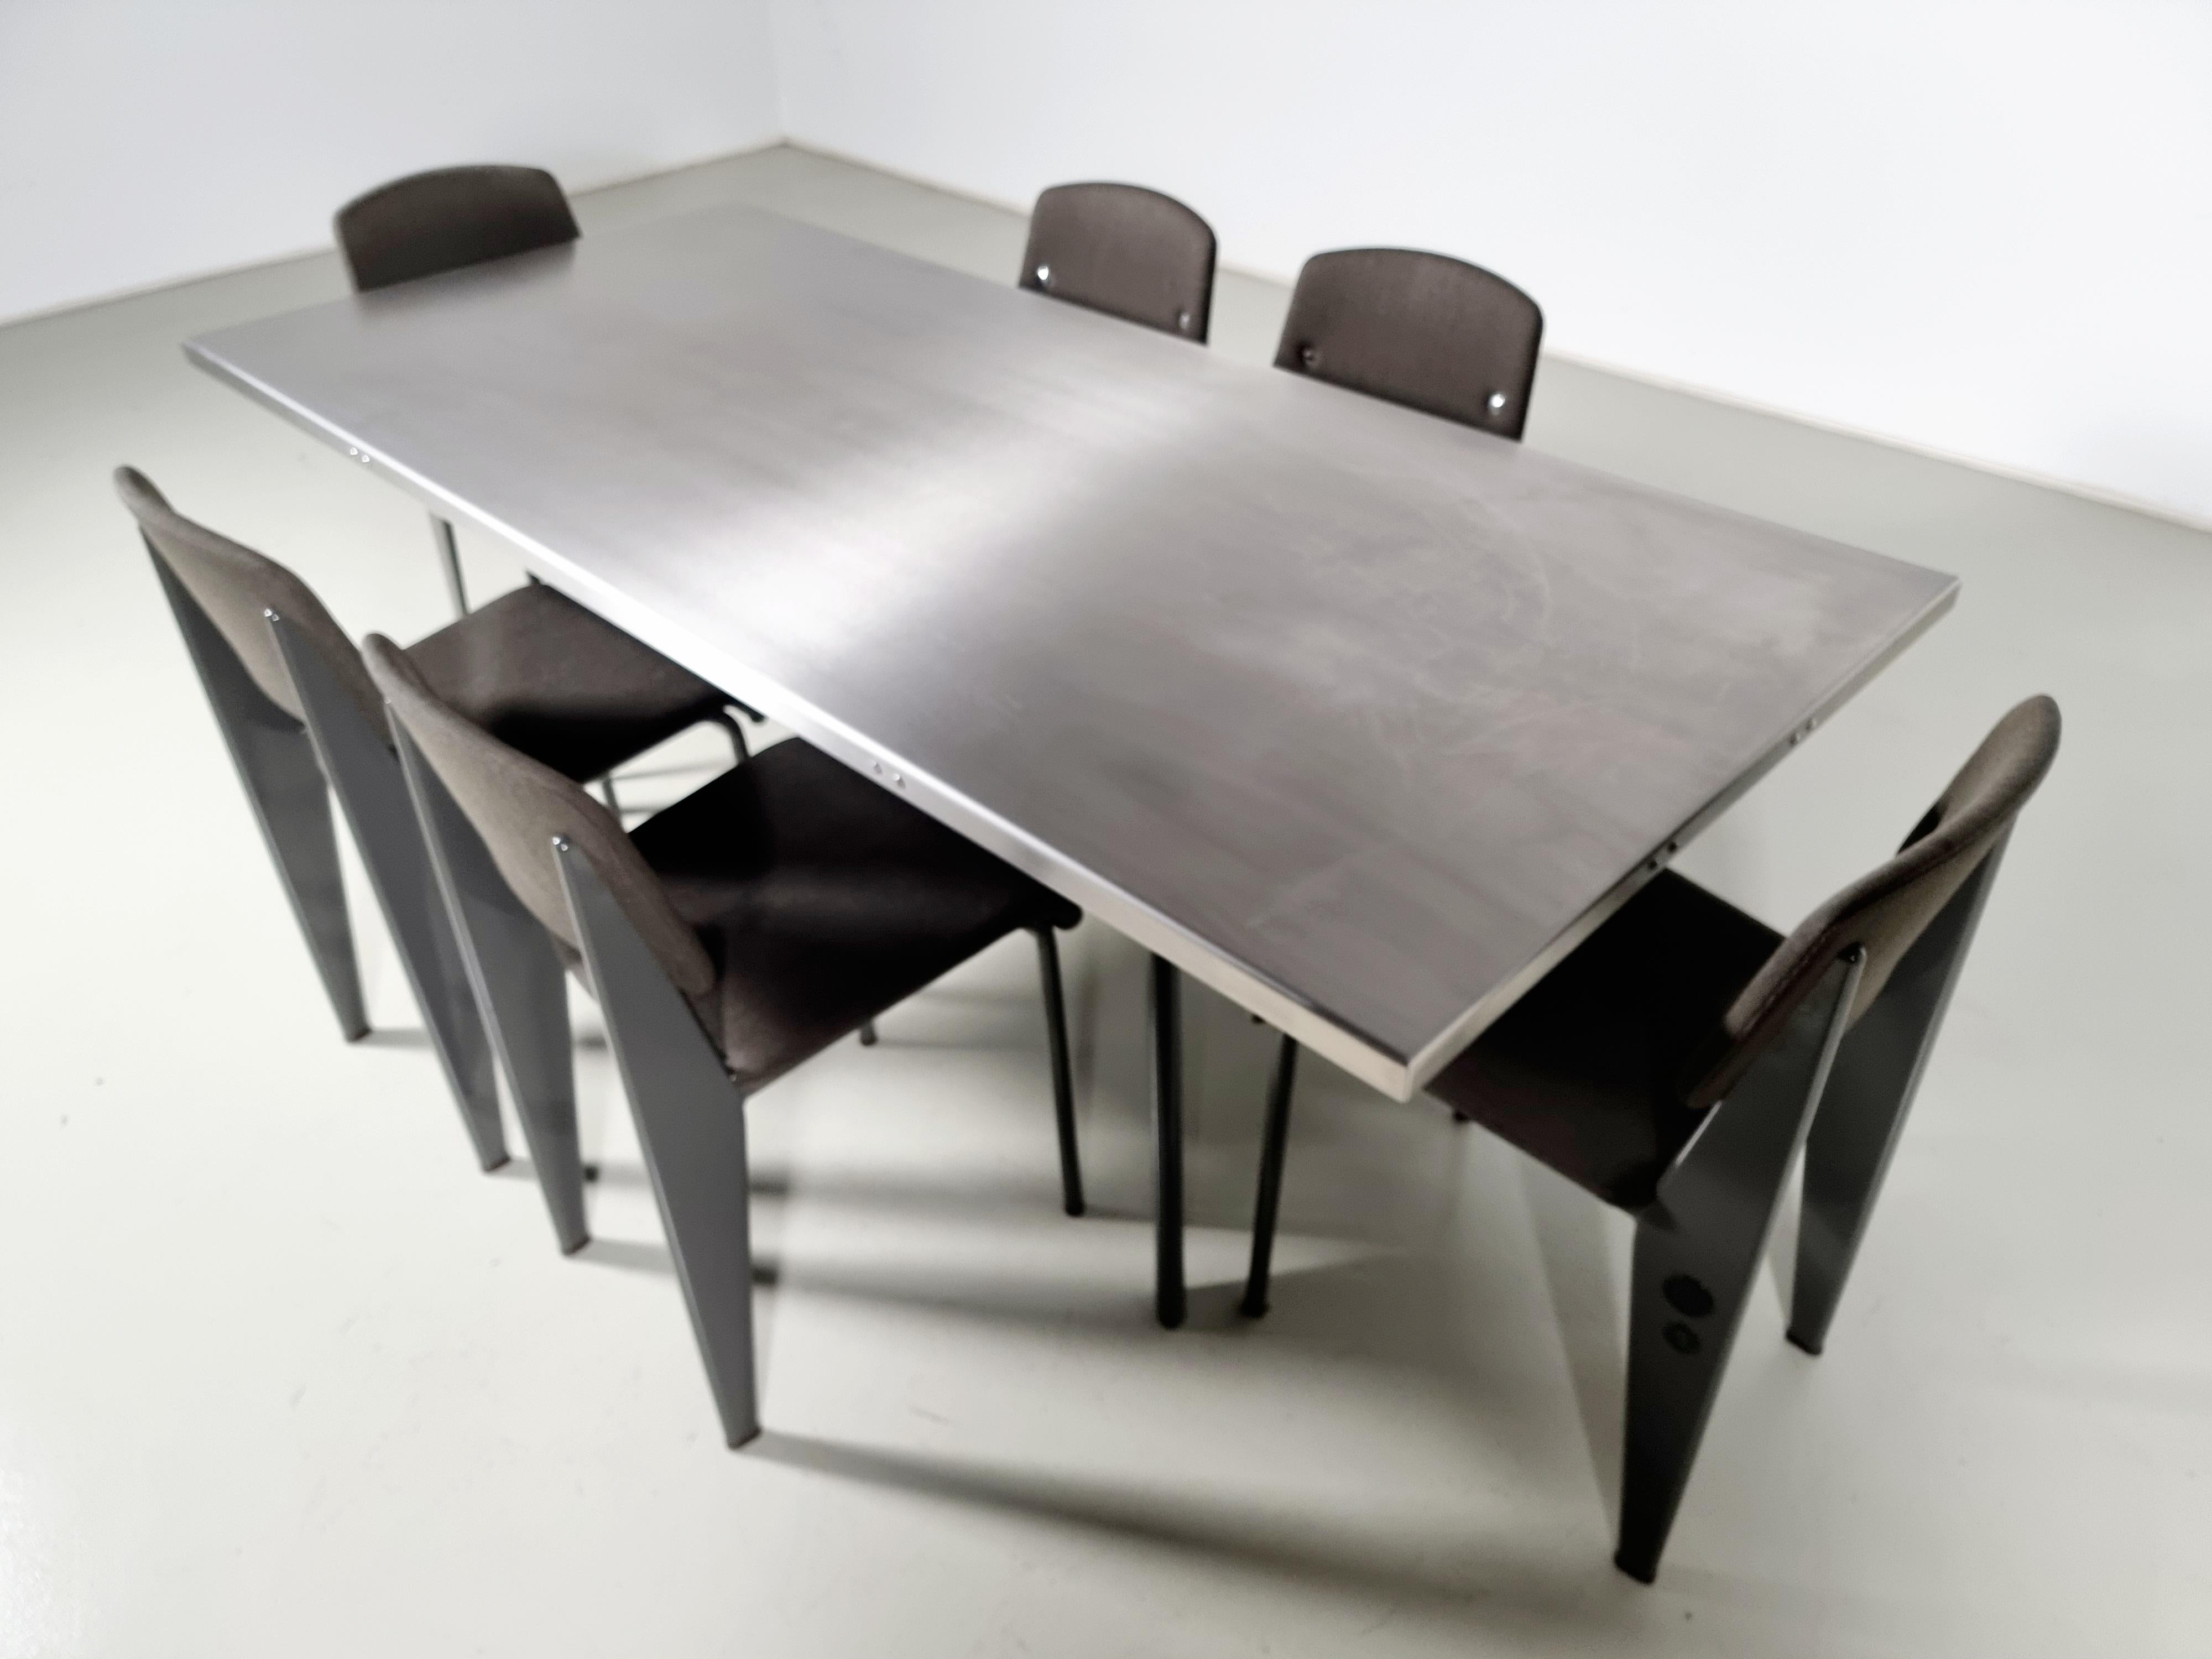 European Jean Prouve by G-Star Raw for Vitra S.A.M. Tropique Table with matching chairs